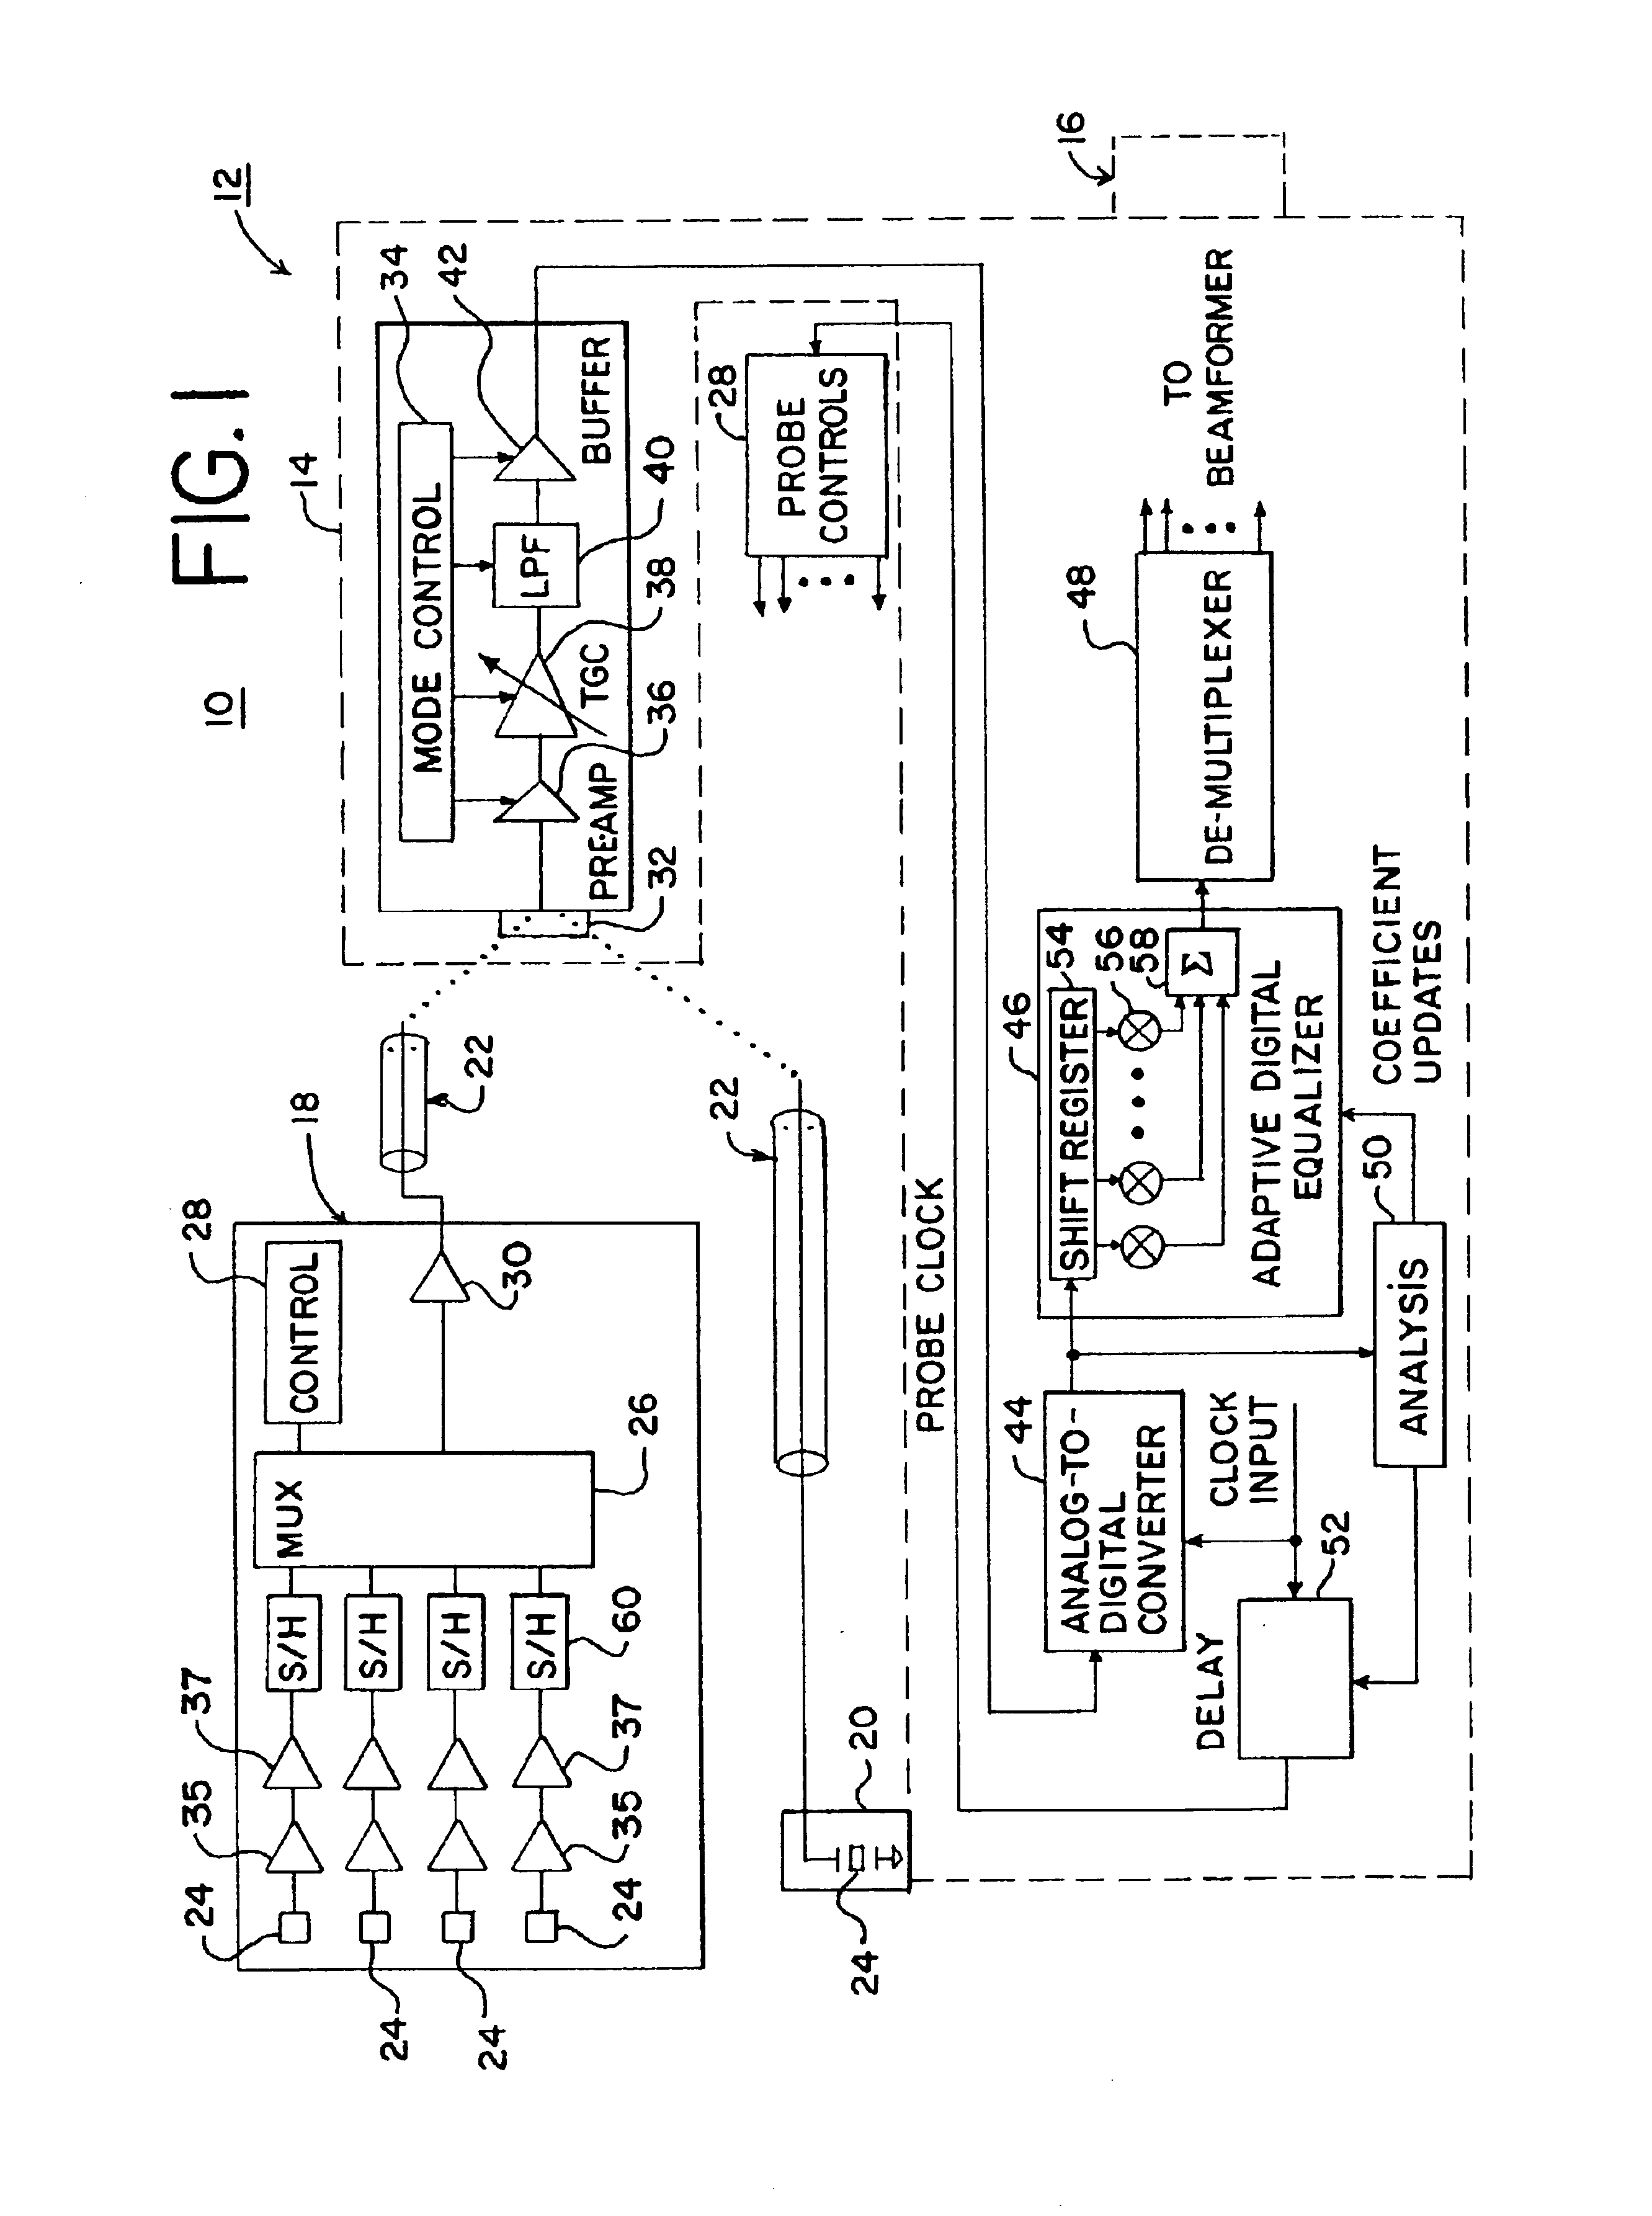 Receive circuit for ultrasound imaging